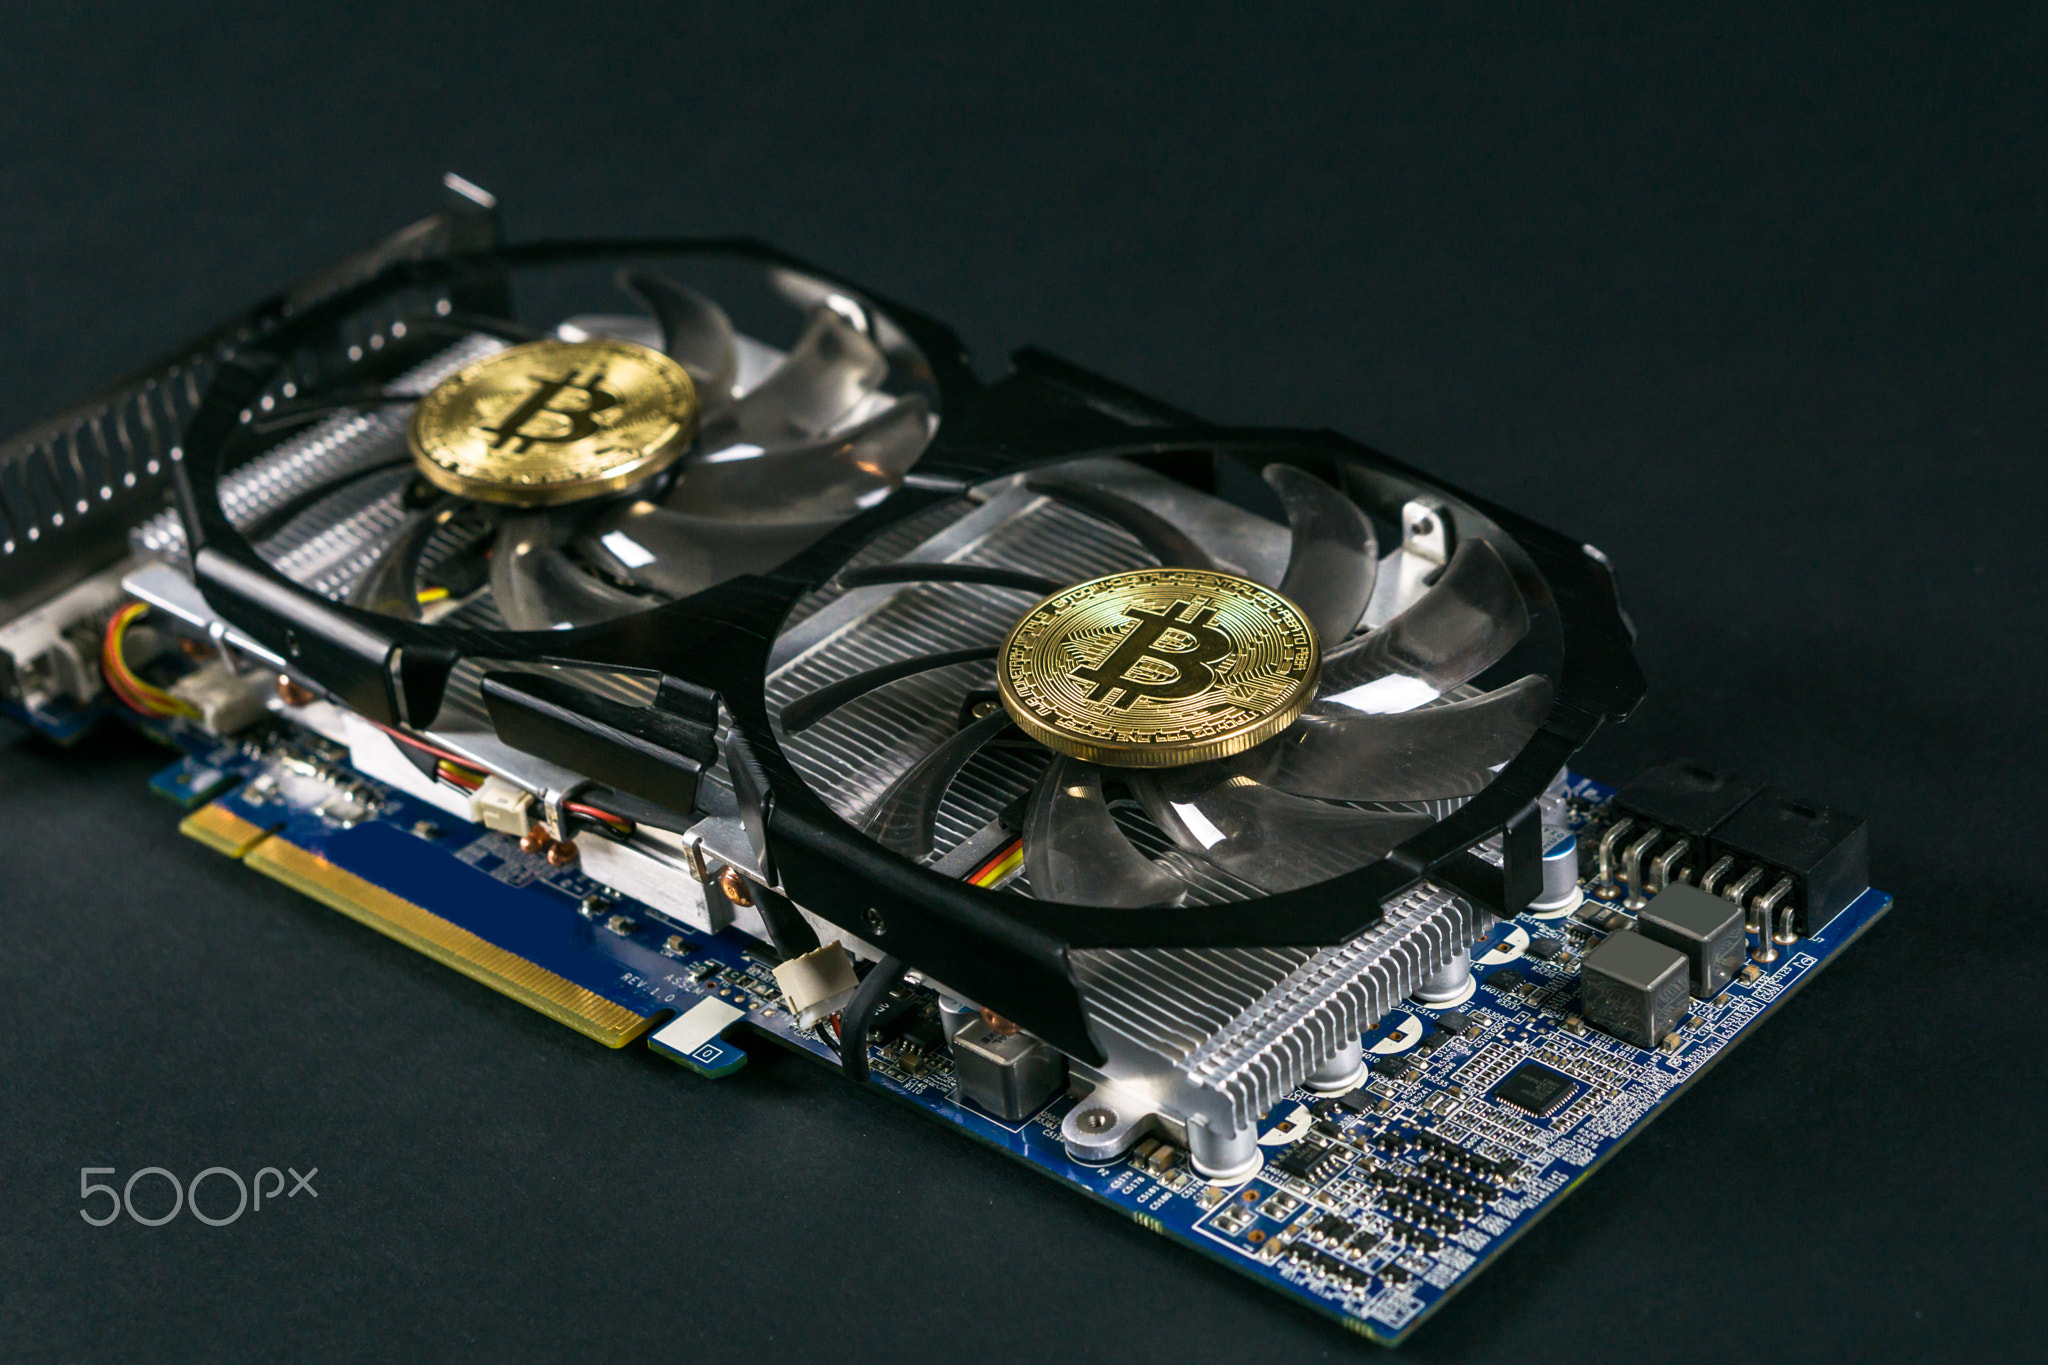 Bitcoin coin on GPU, Cryptocurrency Mining Using Graphic Cards